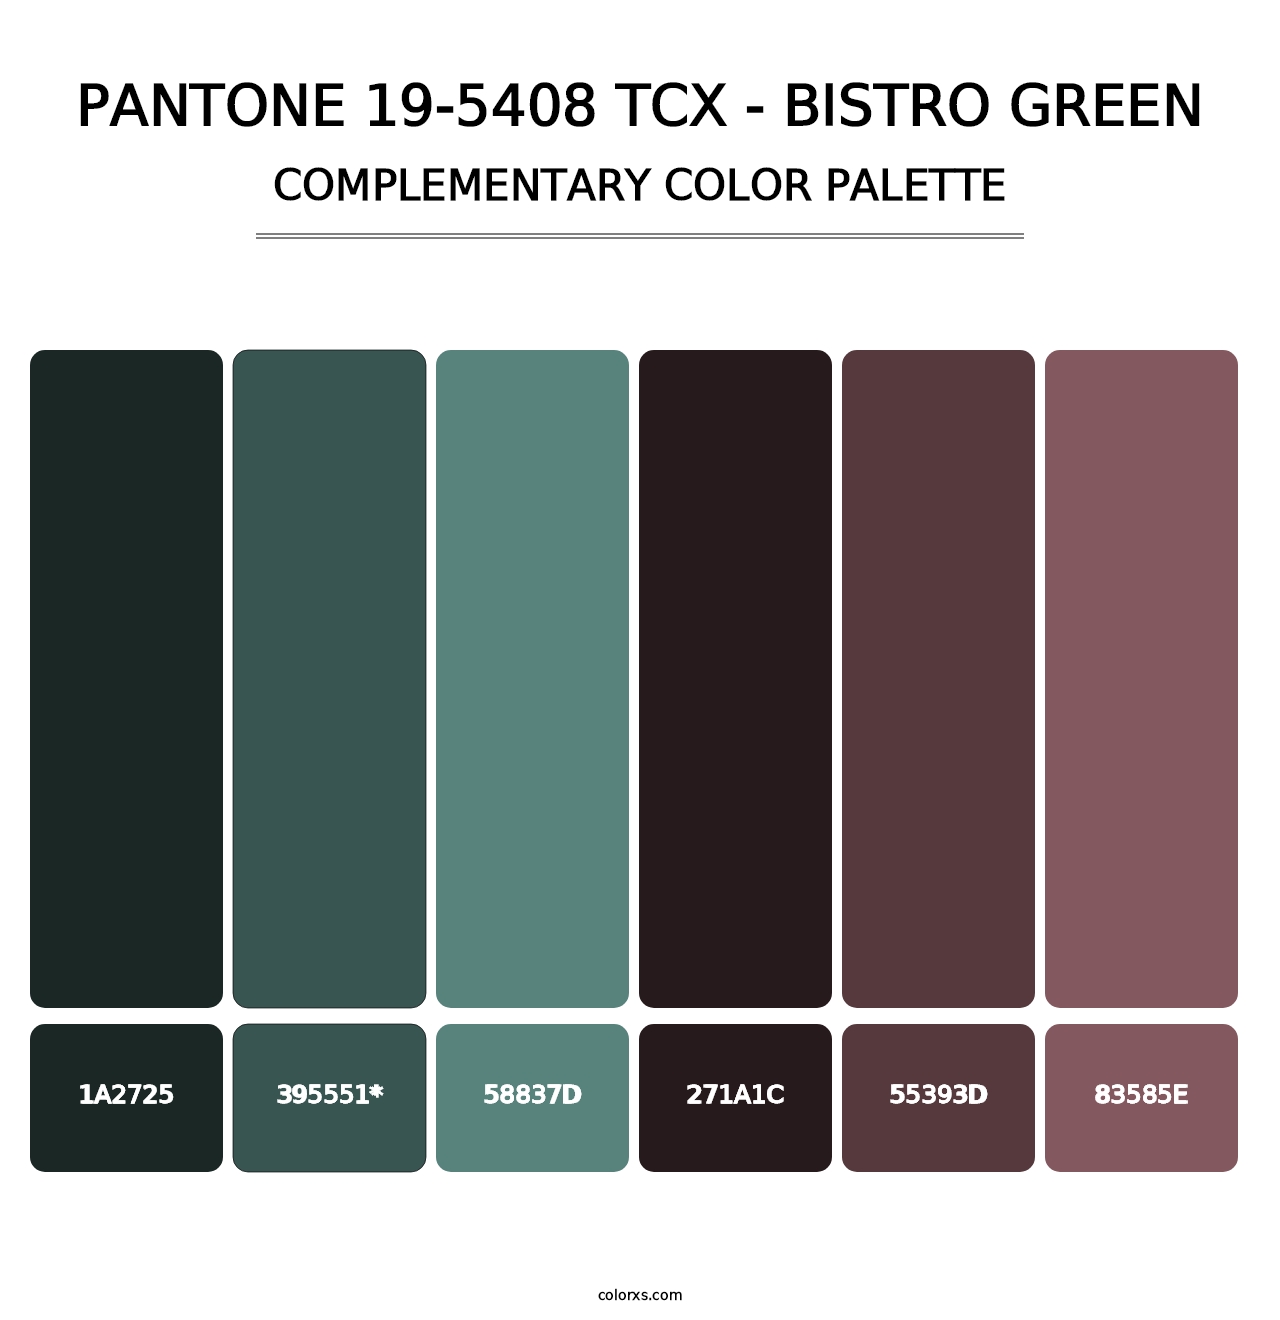 PANTONE 19-5408 TCX - Bistro Green - Complementary Color Palette